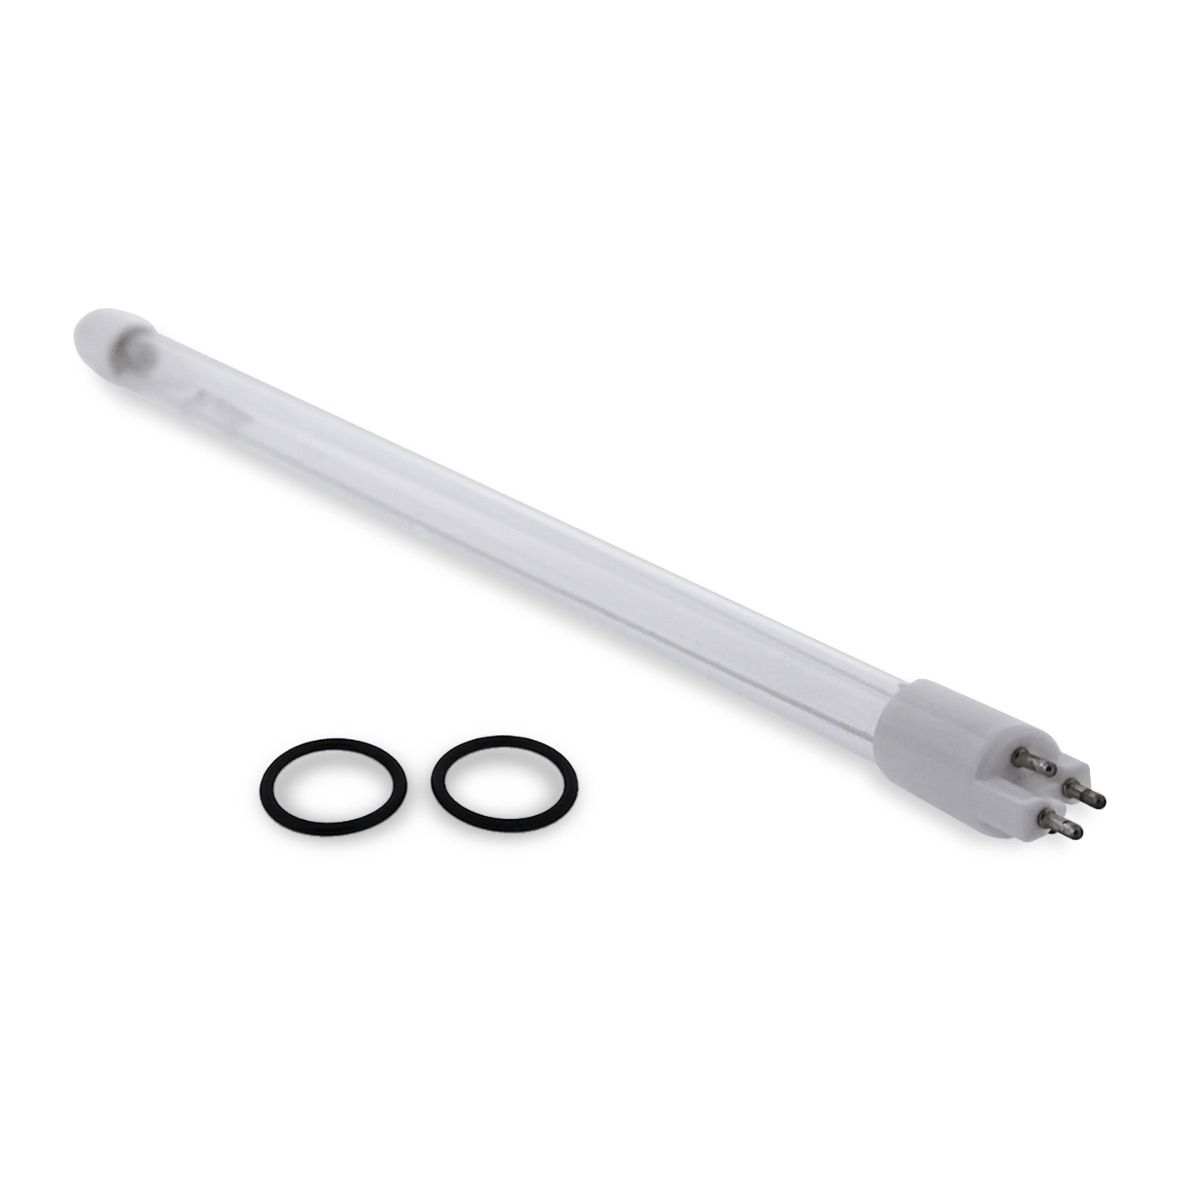 USWF Replacement for S36RL UV Lamp | Fits the VIQUA S12Q, S24Q, S40Q, &amp; SSM-39 Series UV Systems